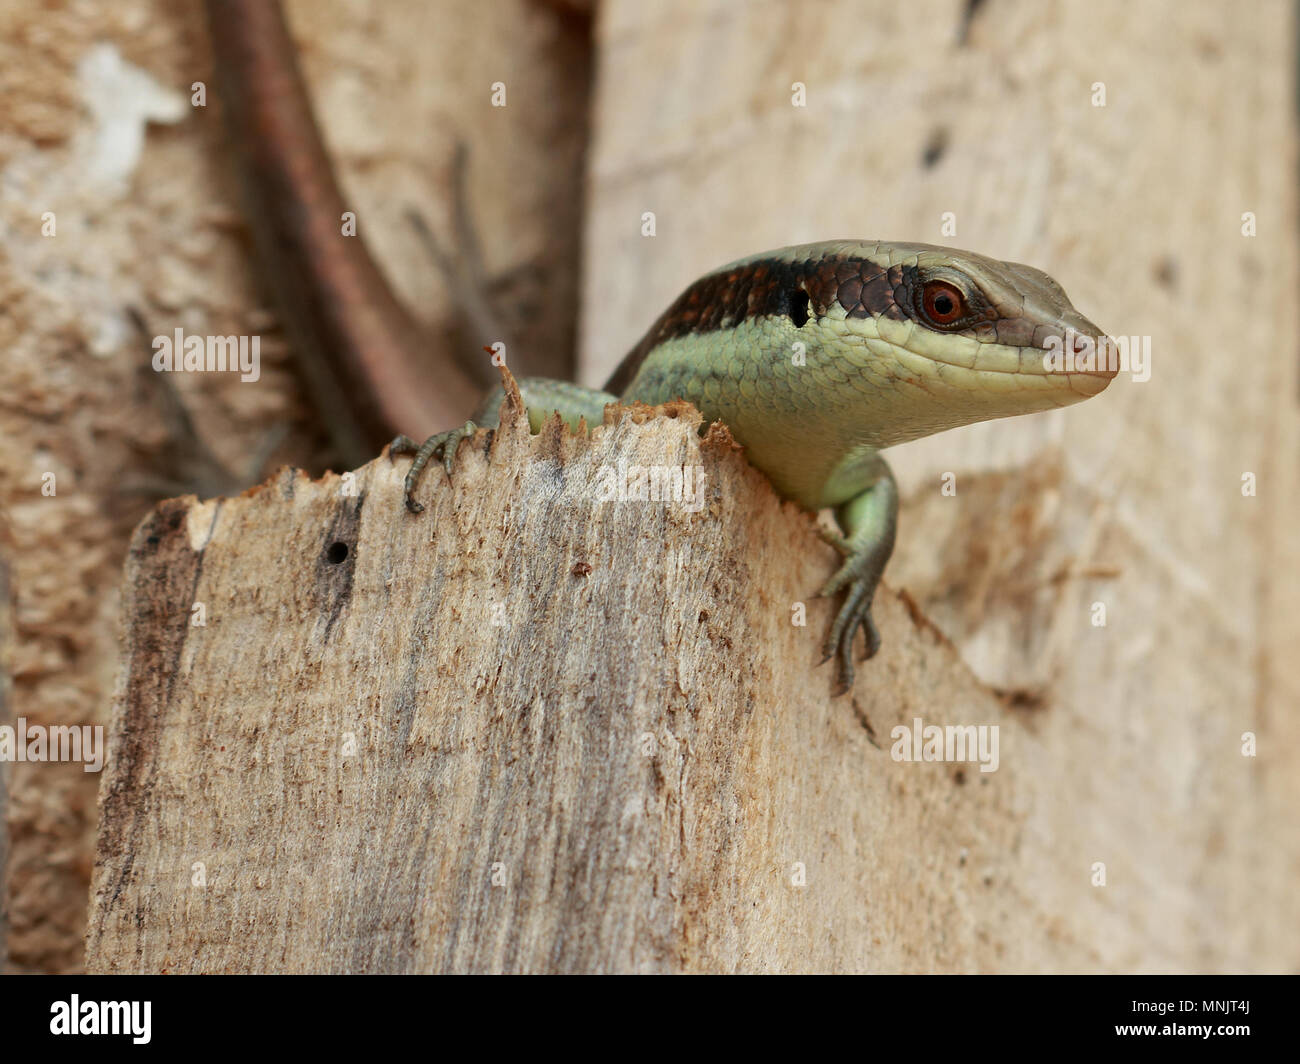 A skink be arrogant on the wood piles. Stock Photo